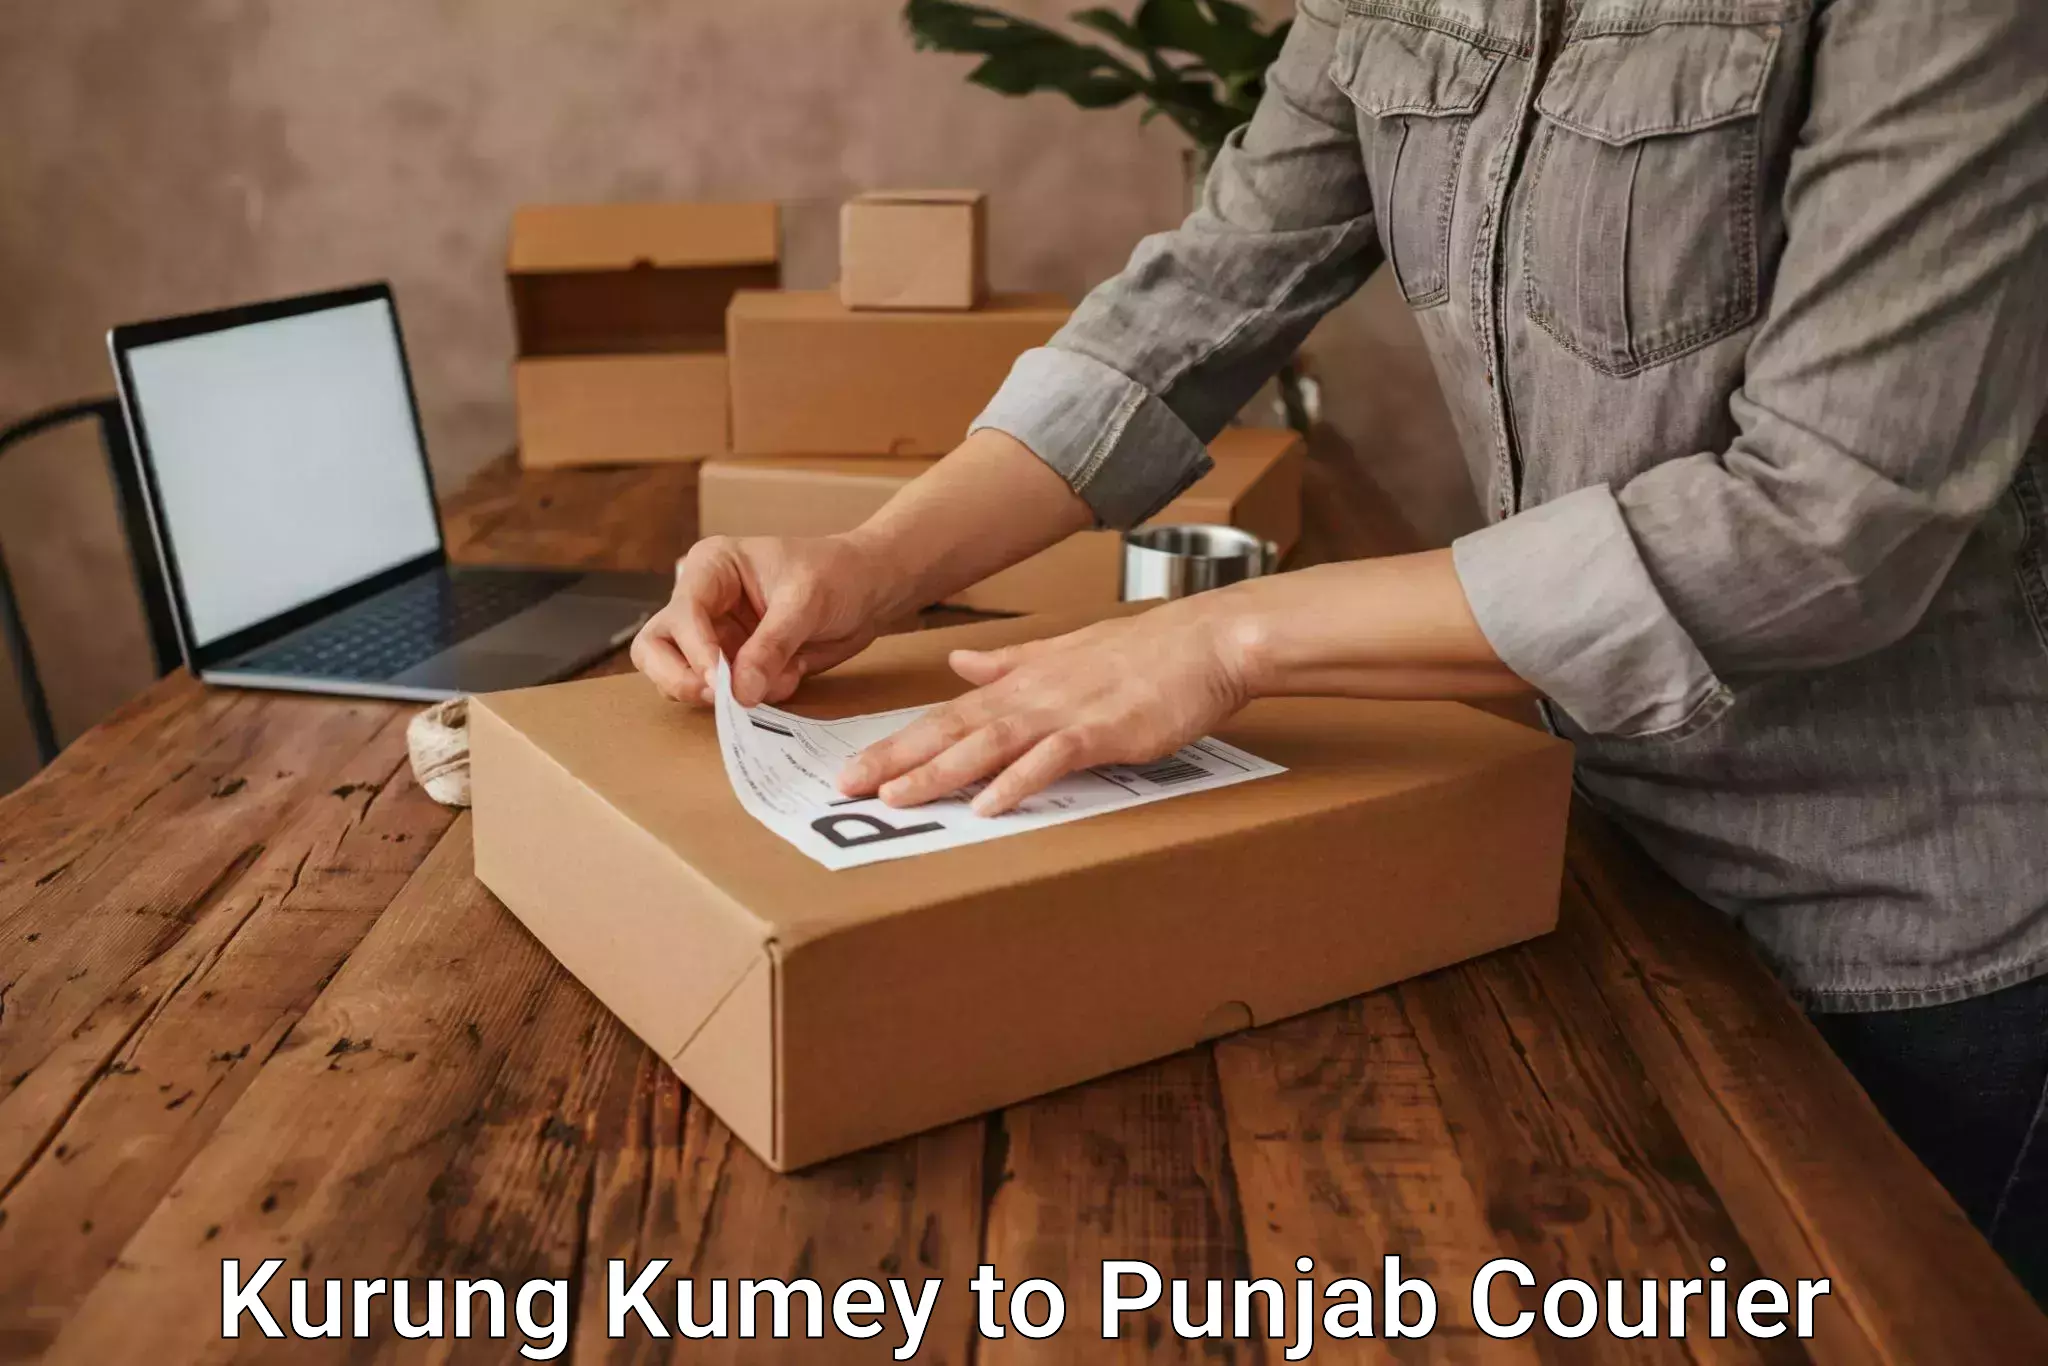 Courier service comparison in Kurung Kumey to Punjab